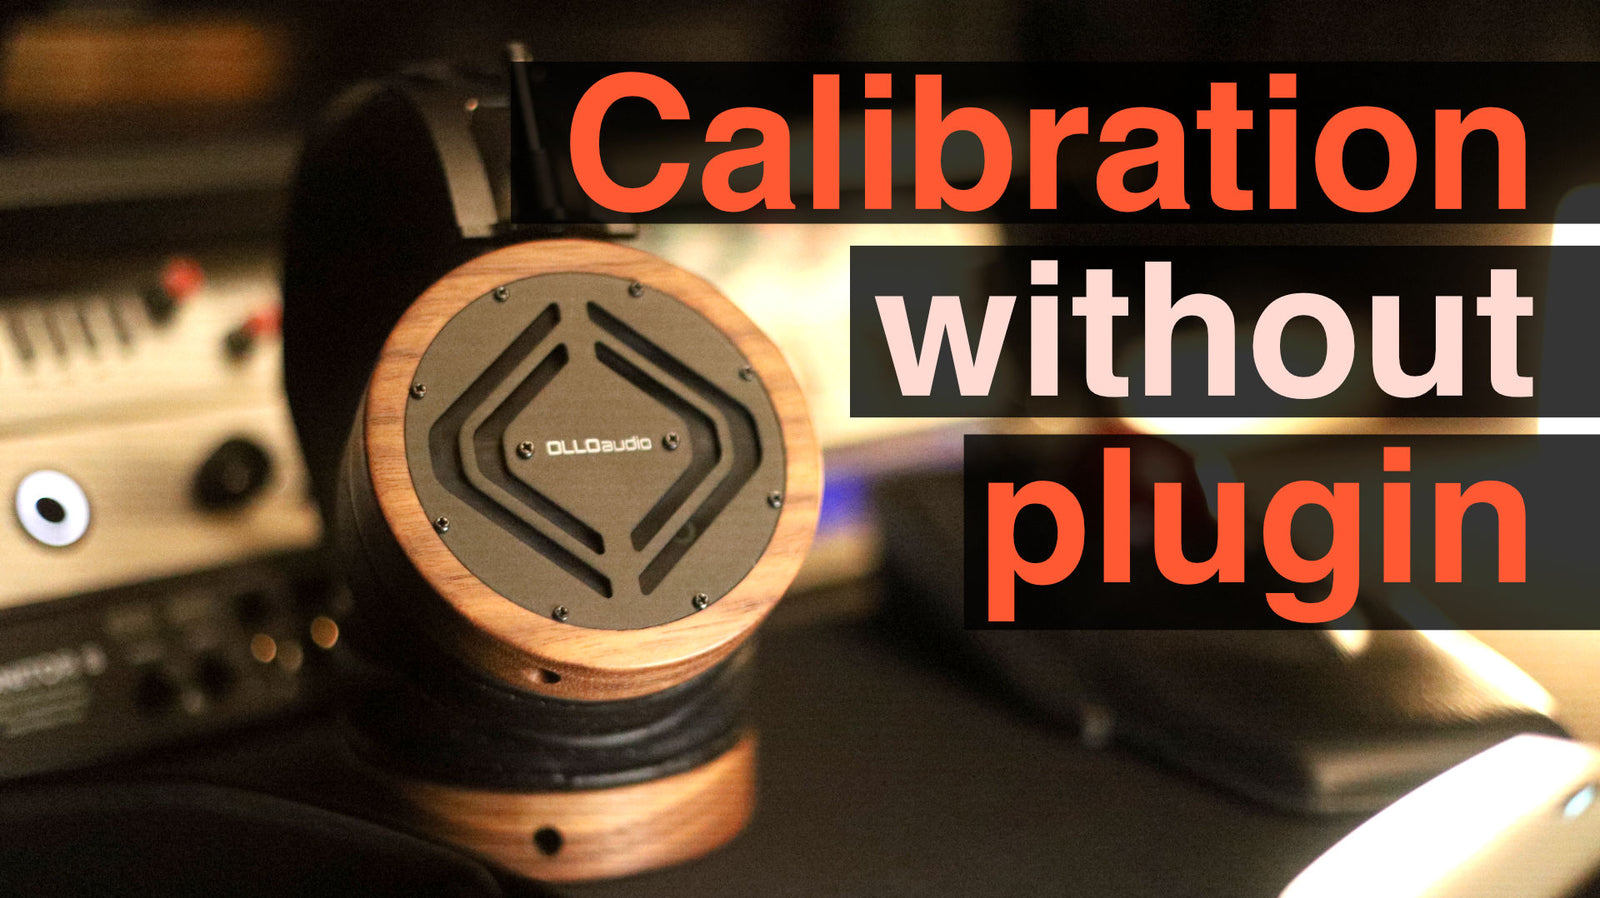 EP33 - Using USC calibration data outside your DAW - Directly with your audio interface